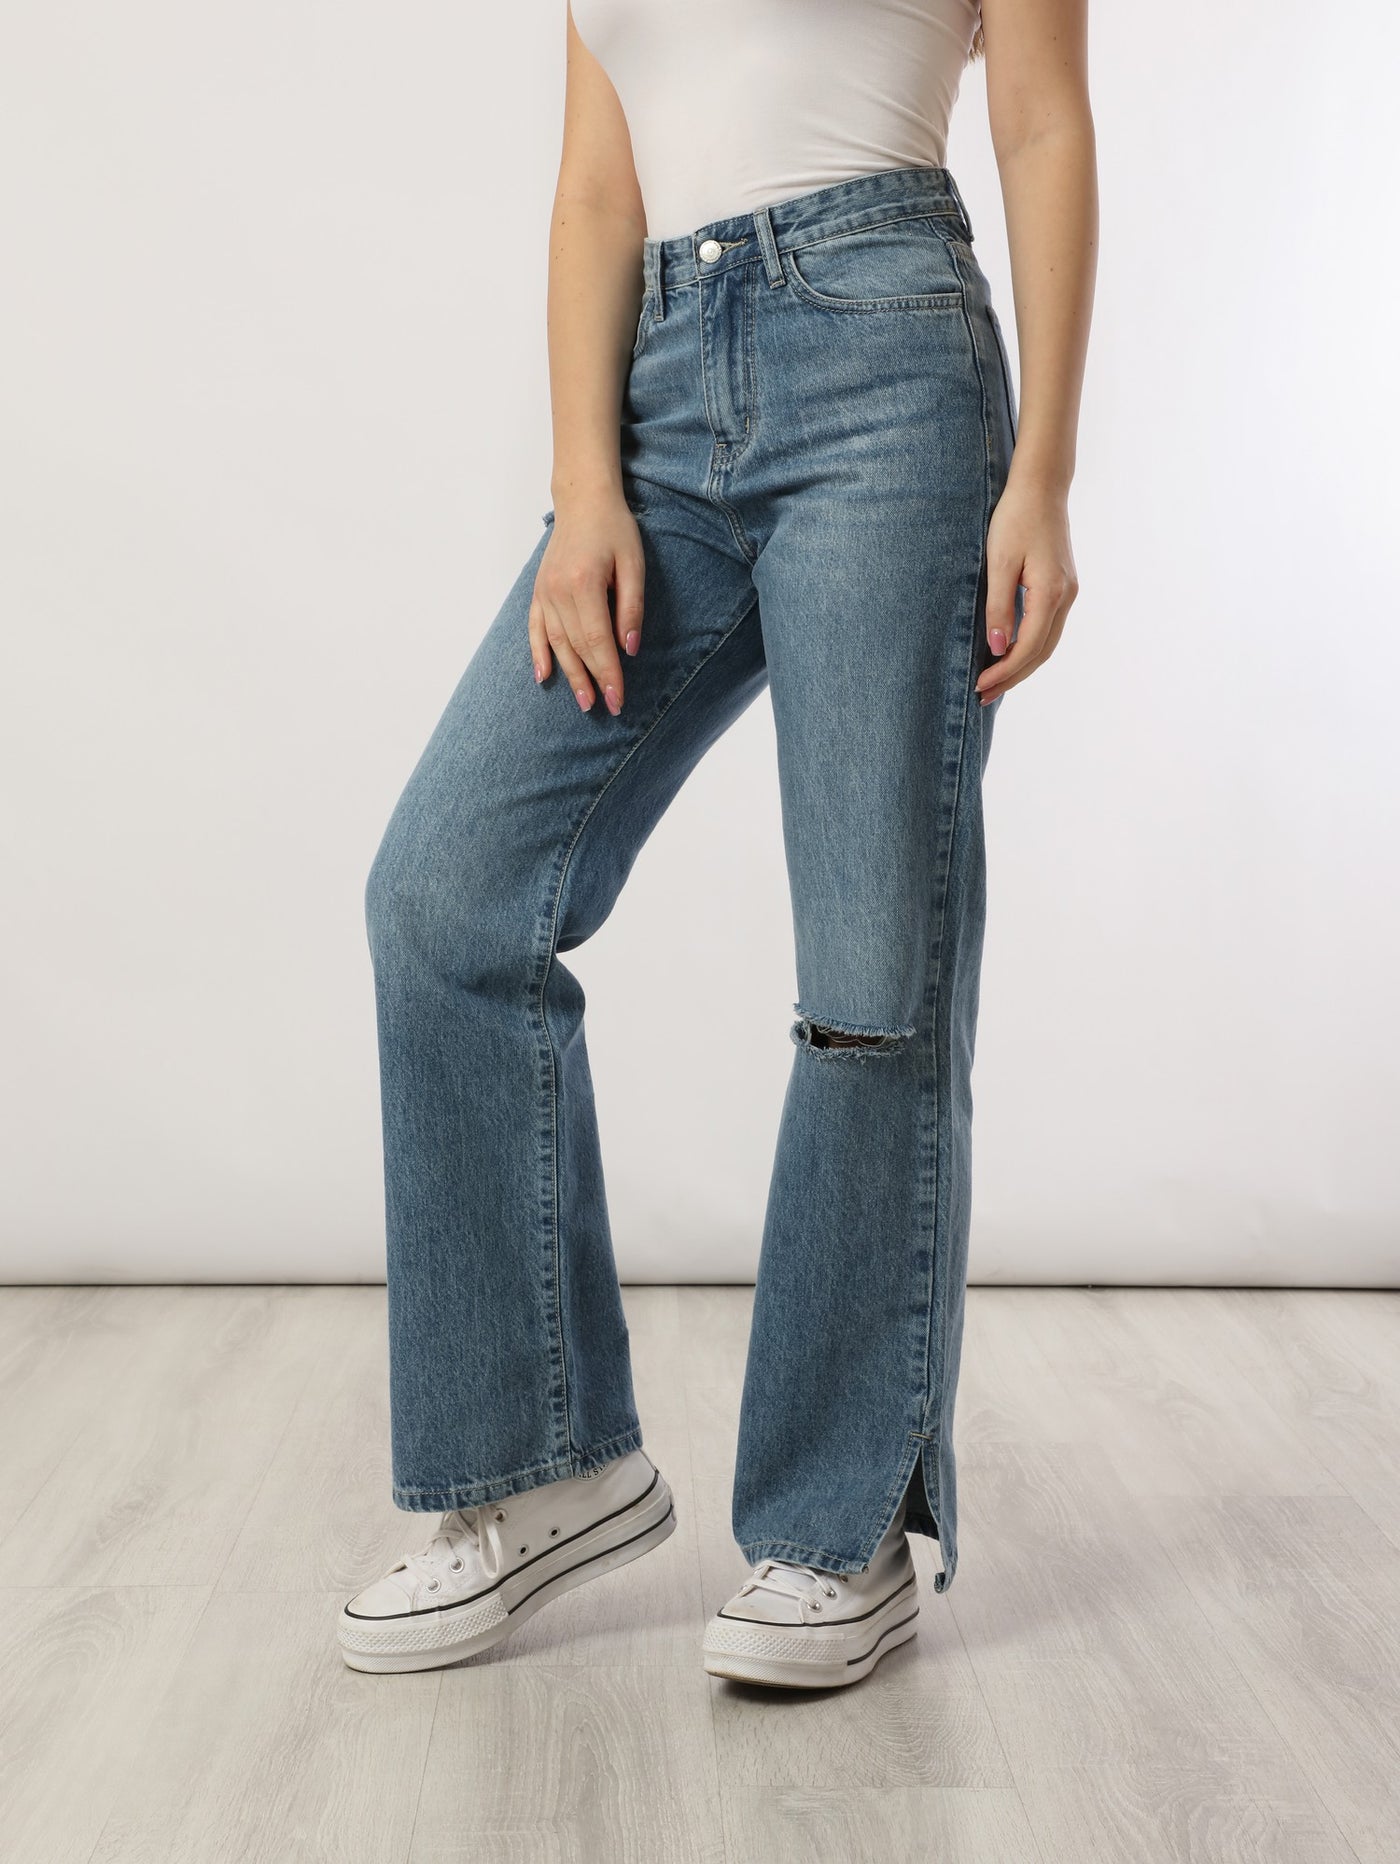 Jeans - Side Slits - Ripped